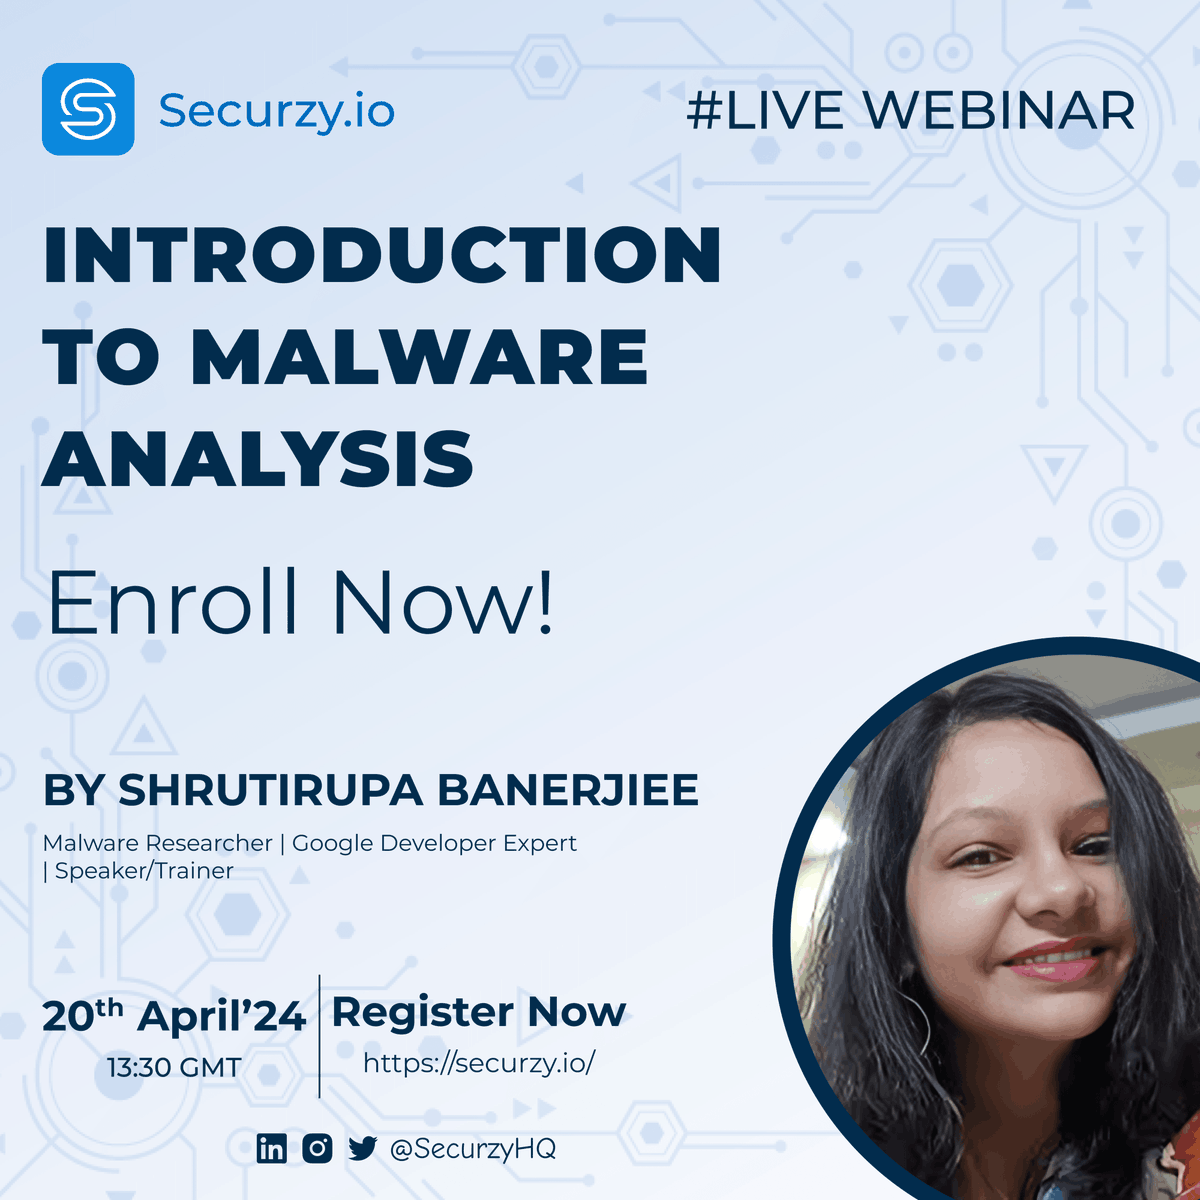 Join us for a LIVE webinar on 'Introduction to Malware Analysis' by Shrutirupa Banerjiee! Enhance your cybersecurity skills and get an exclusive discount on Securzy Pro with code 'SECURZY24.' Register now: learn.securzy.io/webinar/introd… #MalwareAnalysis #Cybersecurity #Securzy